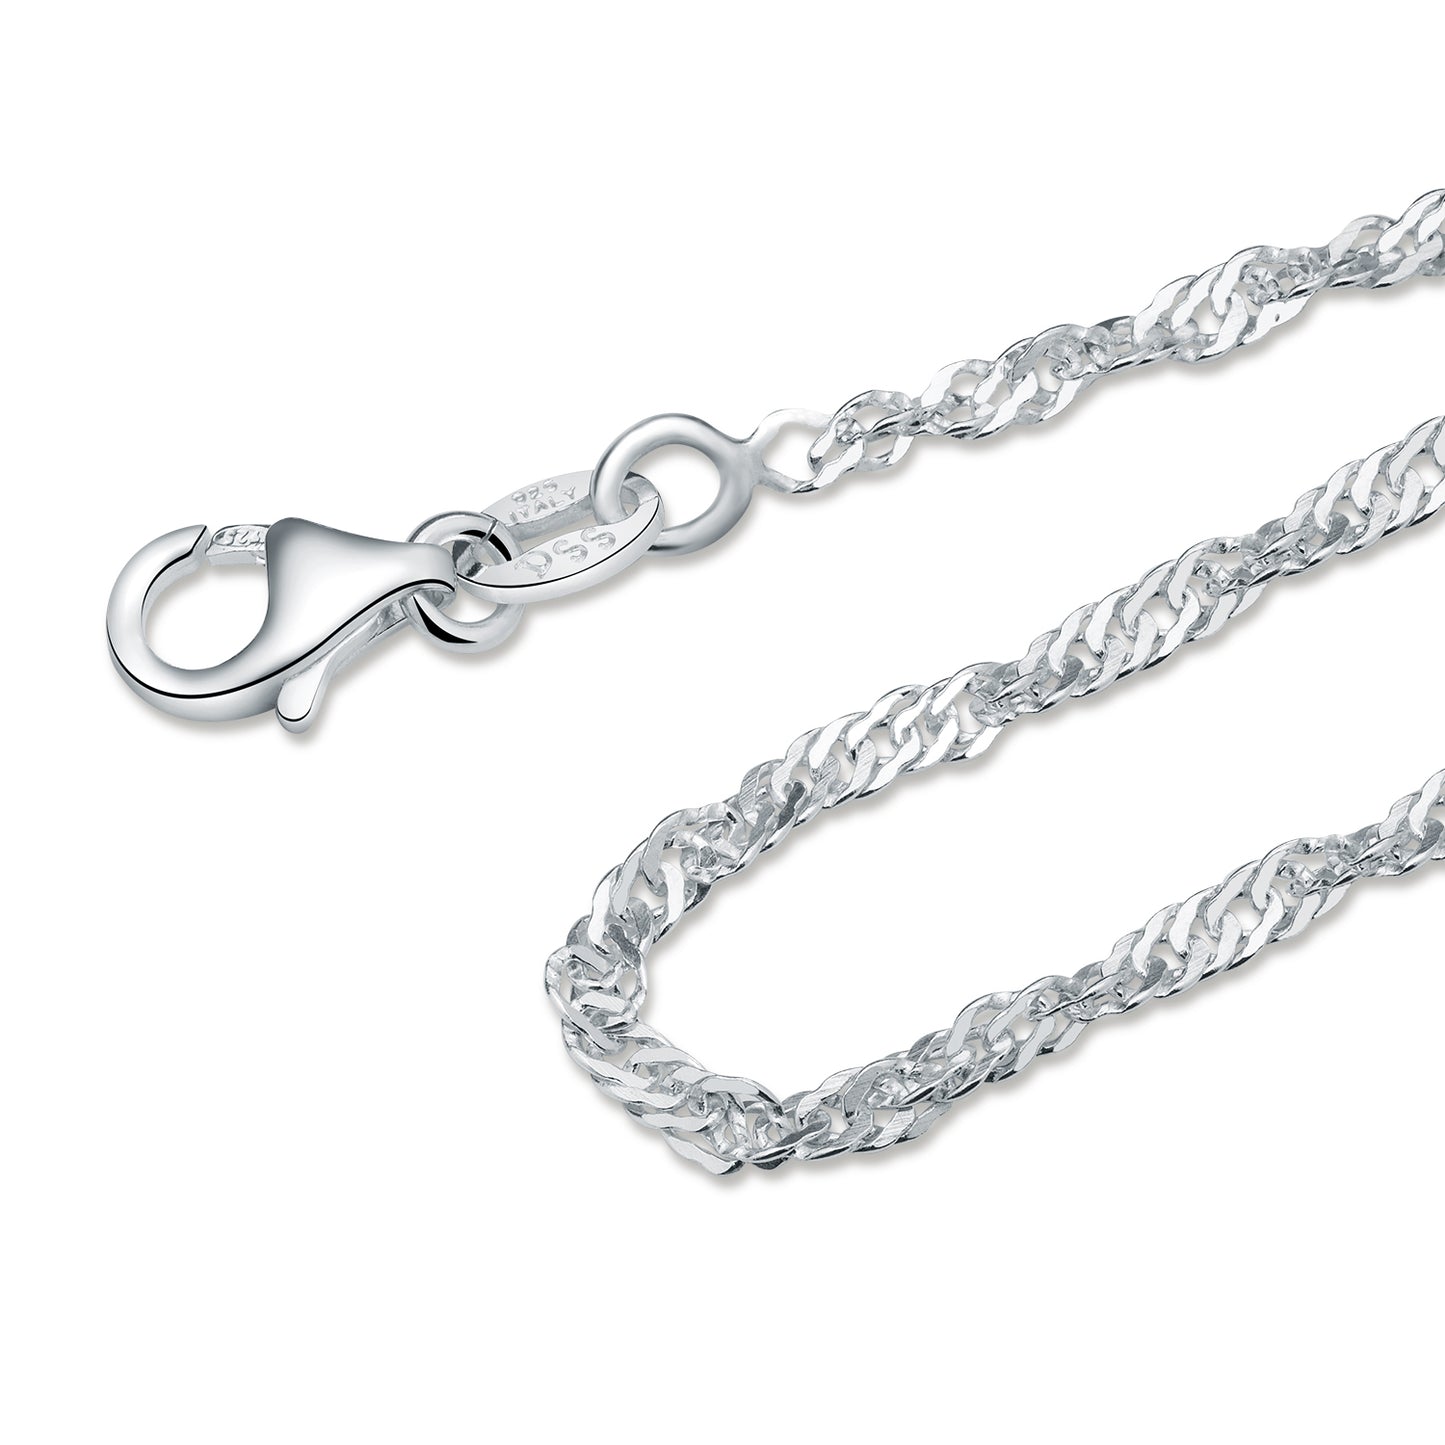 2MM Sterling Silver Singapore Chain with Lobster Claw Clasp